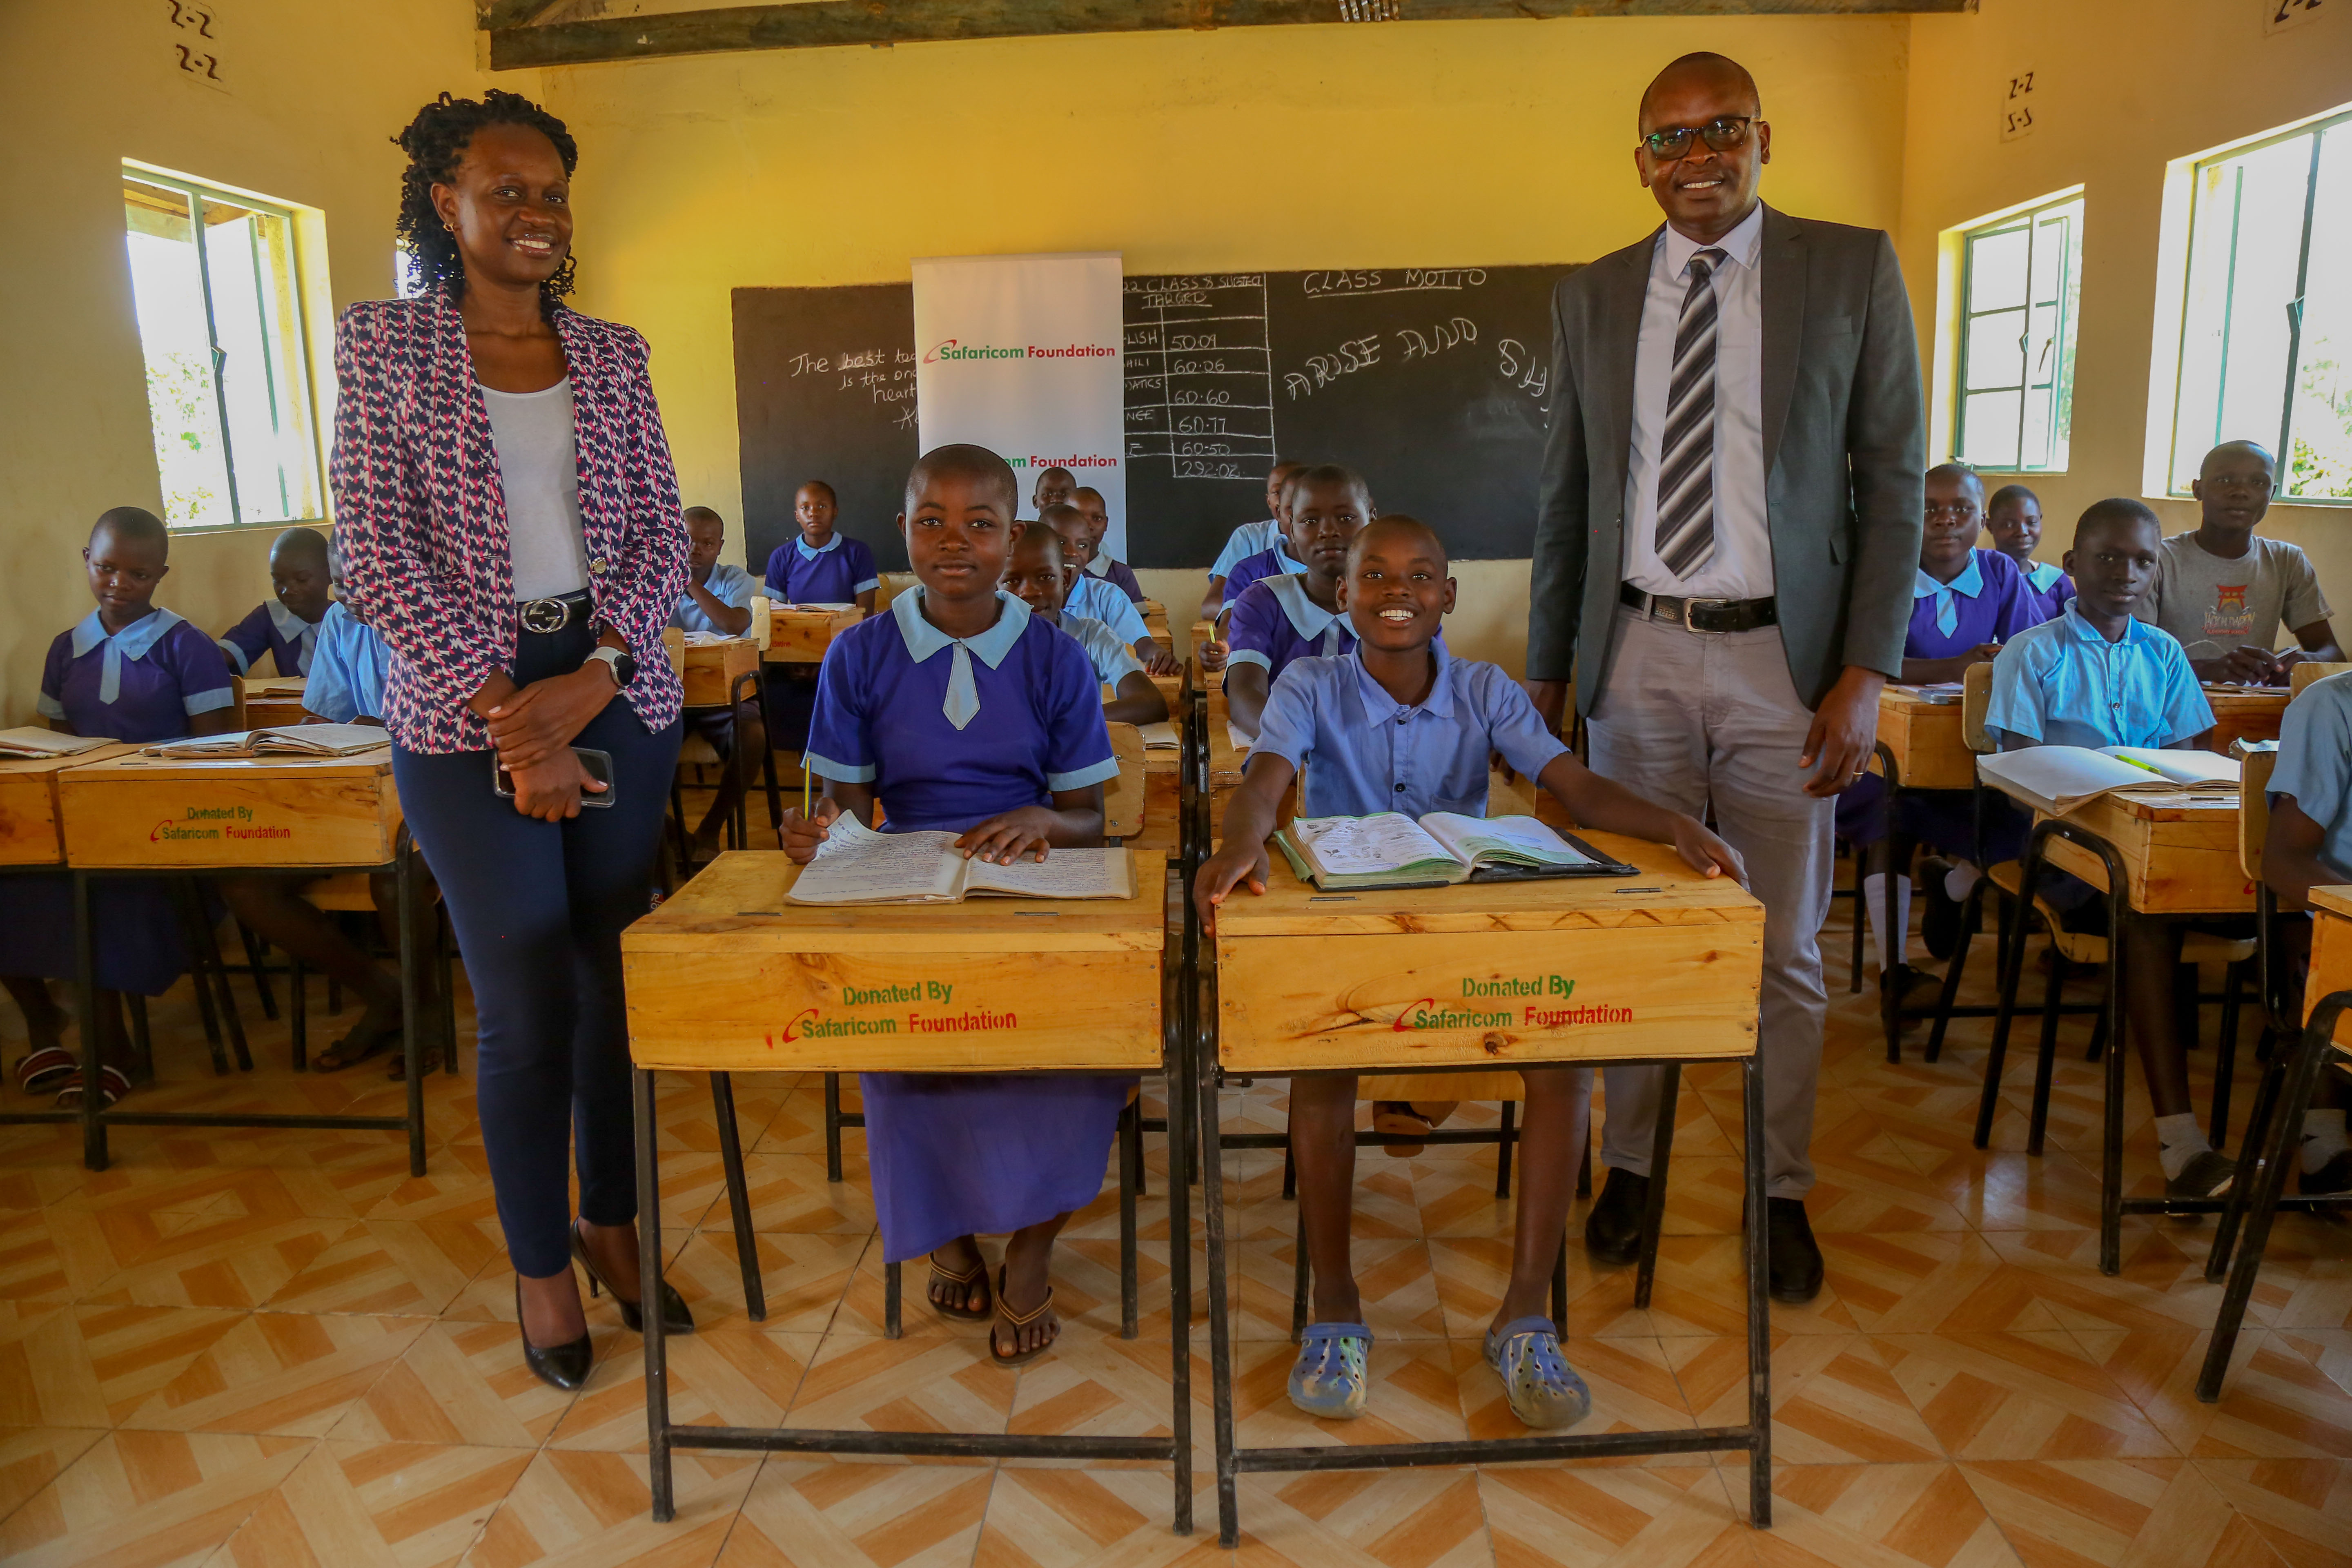 Safaricom Foundation improves school facilities for over 2,000 students in Western Kenya